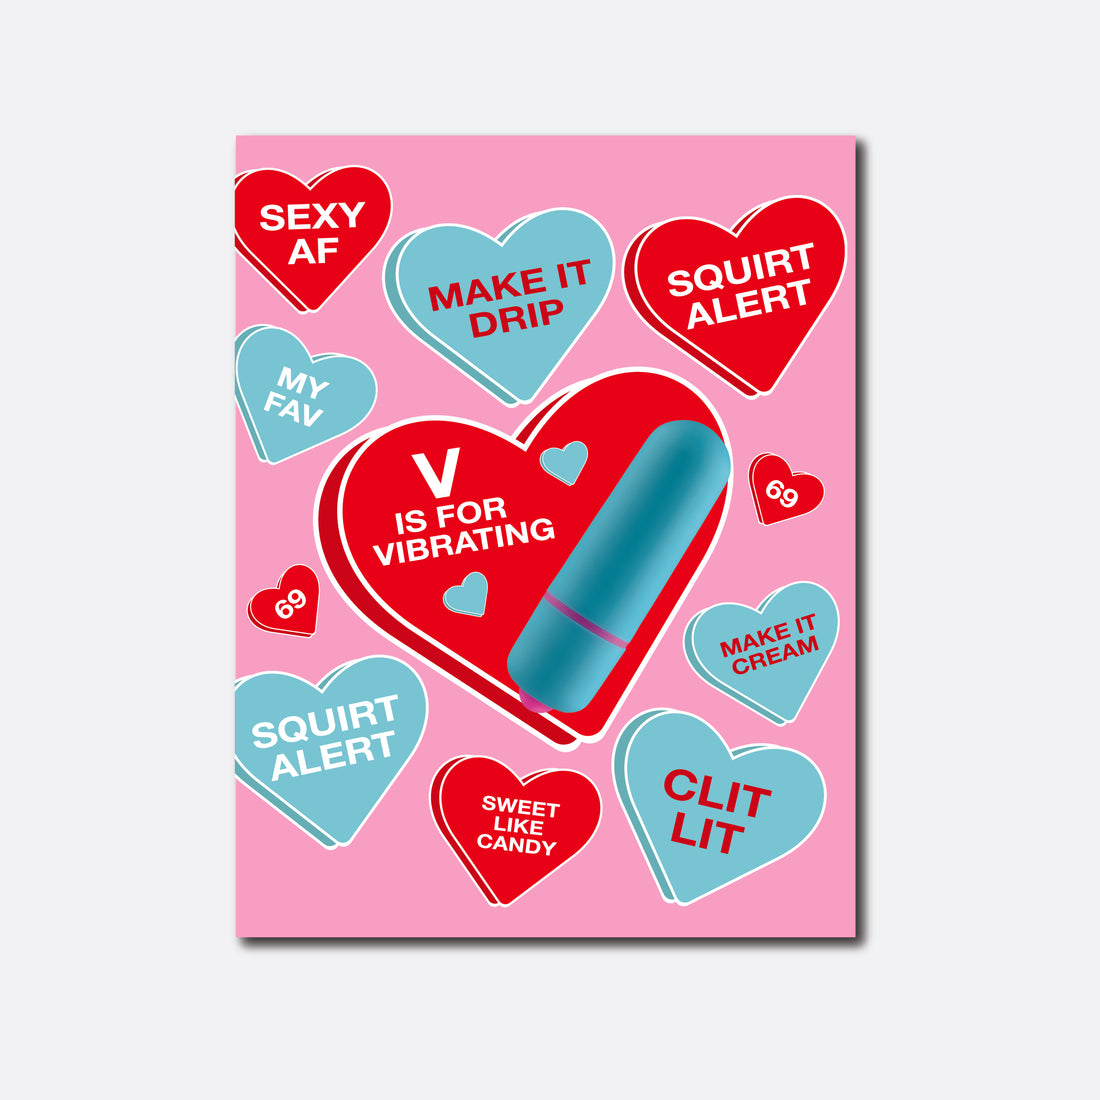 A playful and suggestive greeting card with a pink background, decorated with various candy hearts in shades of blue and red, each featuring flirty and provocative phrases. A large heart in the center displays a blue vibrator with the text &